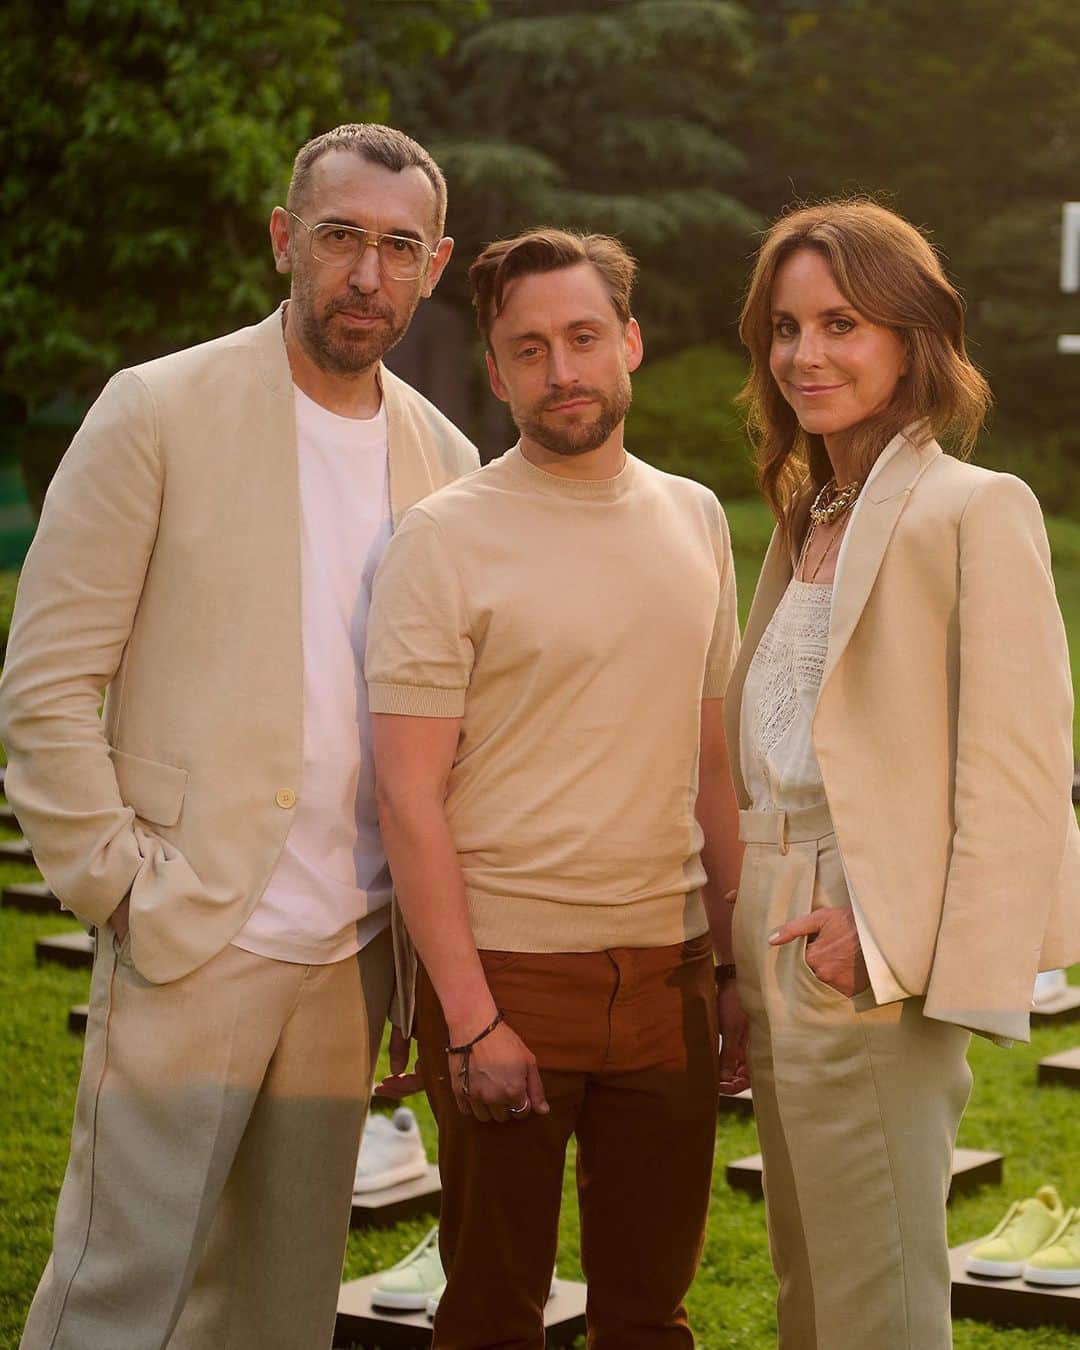 MR PORTERのインスタグラム：「@mrporter x @zegnaofficial in the Hamptons.  Guests including Global Triple Stitch™ Ambassador Kieran Culkin joined MR PORTER and ZEGNA at the LongHouse Reserve to celebrate MR PORTER’s Al Fresco! edit and the Italian label’s iconic Triple Stitch™ Luxury Leisurewear Shoe.  #MRPORTERSummerStories #MRPORTERxZegna #TripleStitch #ZEGNA  Guests pictured: @alisonloehnis @alessandrosartoriofficial @saintjhn  @tytaylor @corymichaelsmith @young_emperors @joeholder」